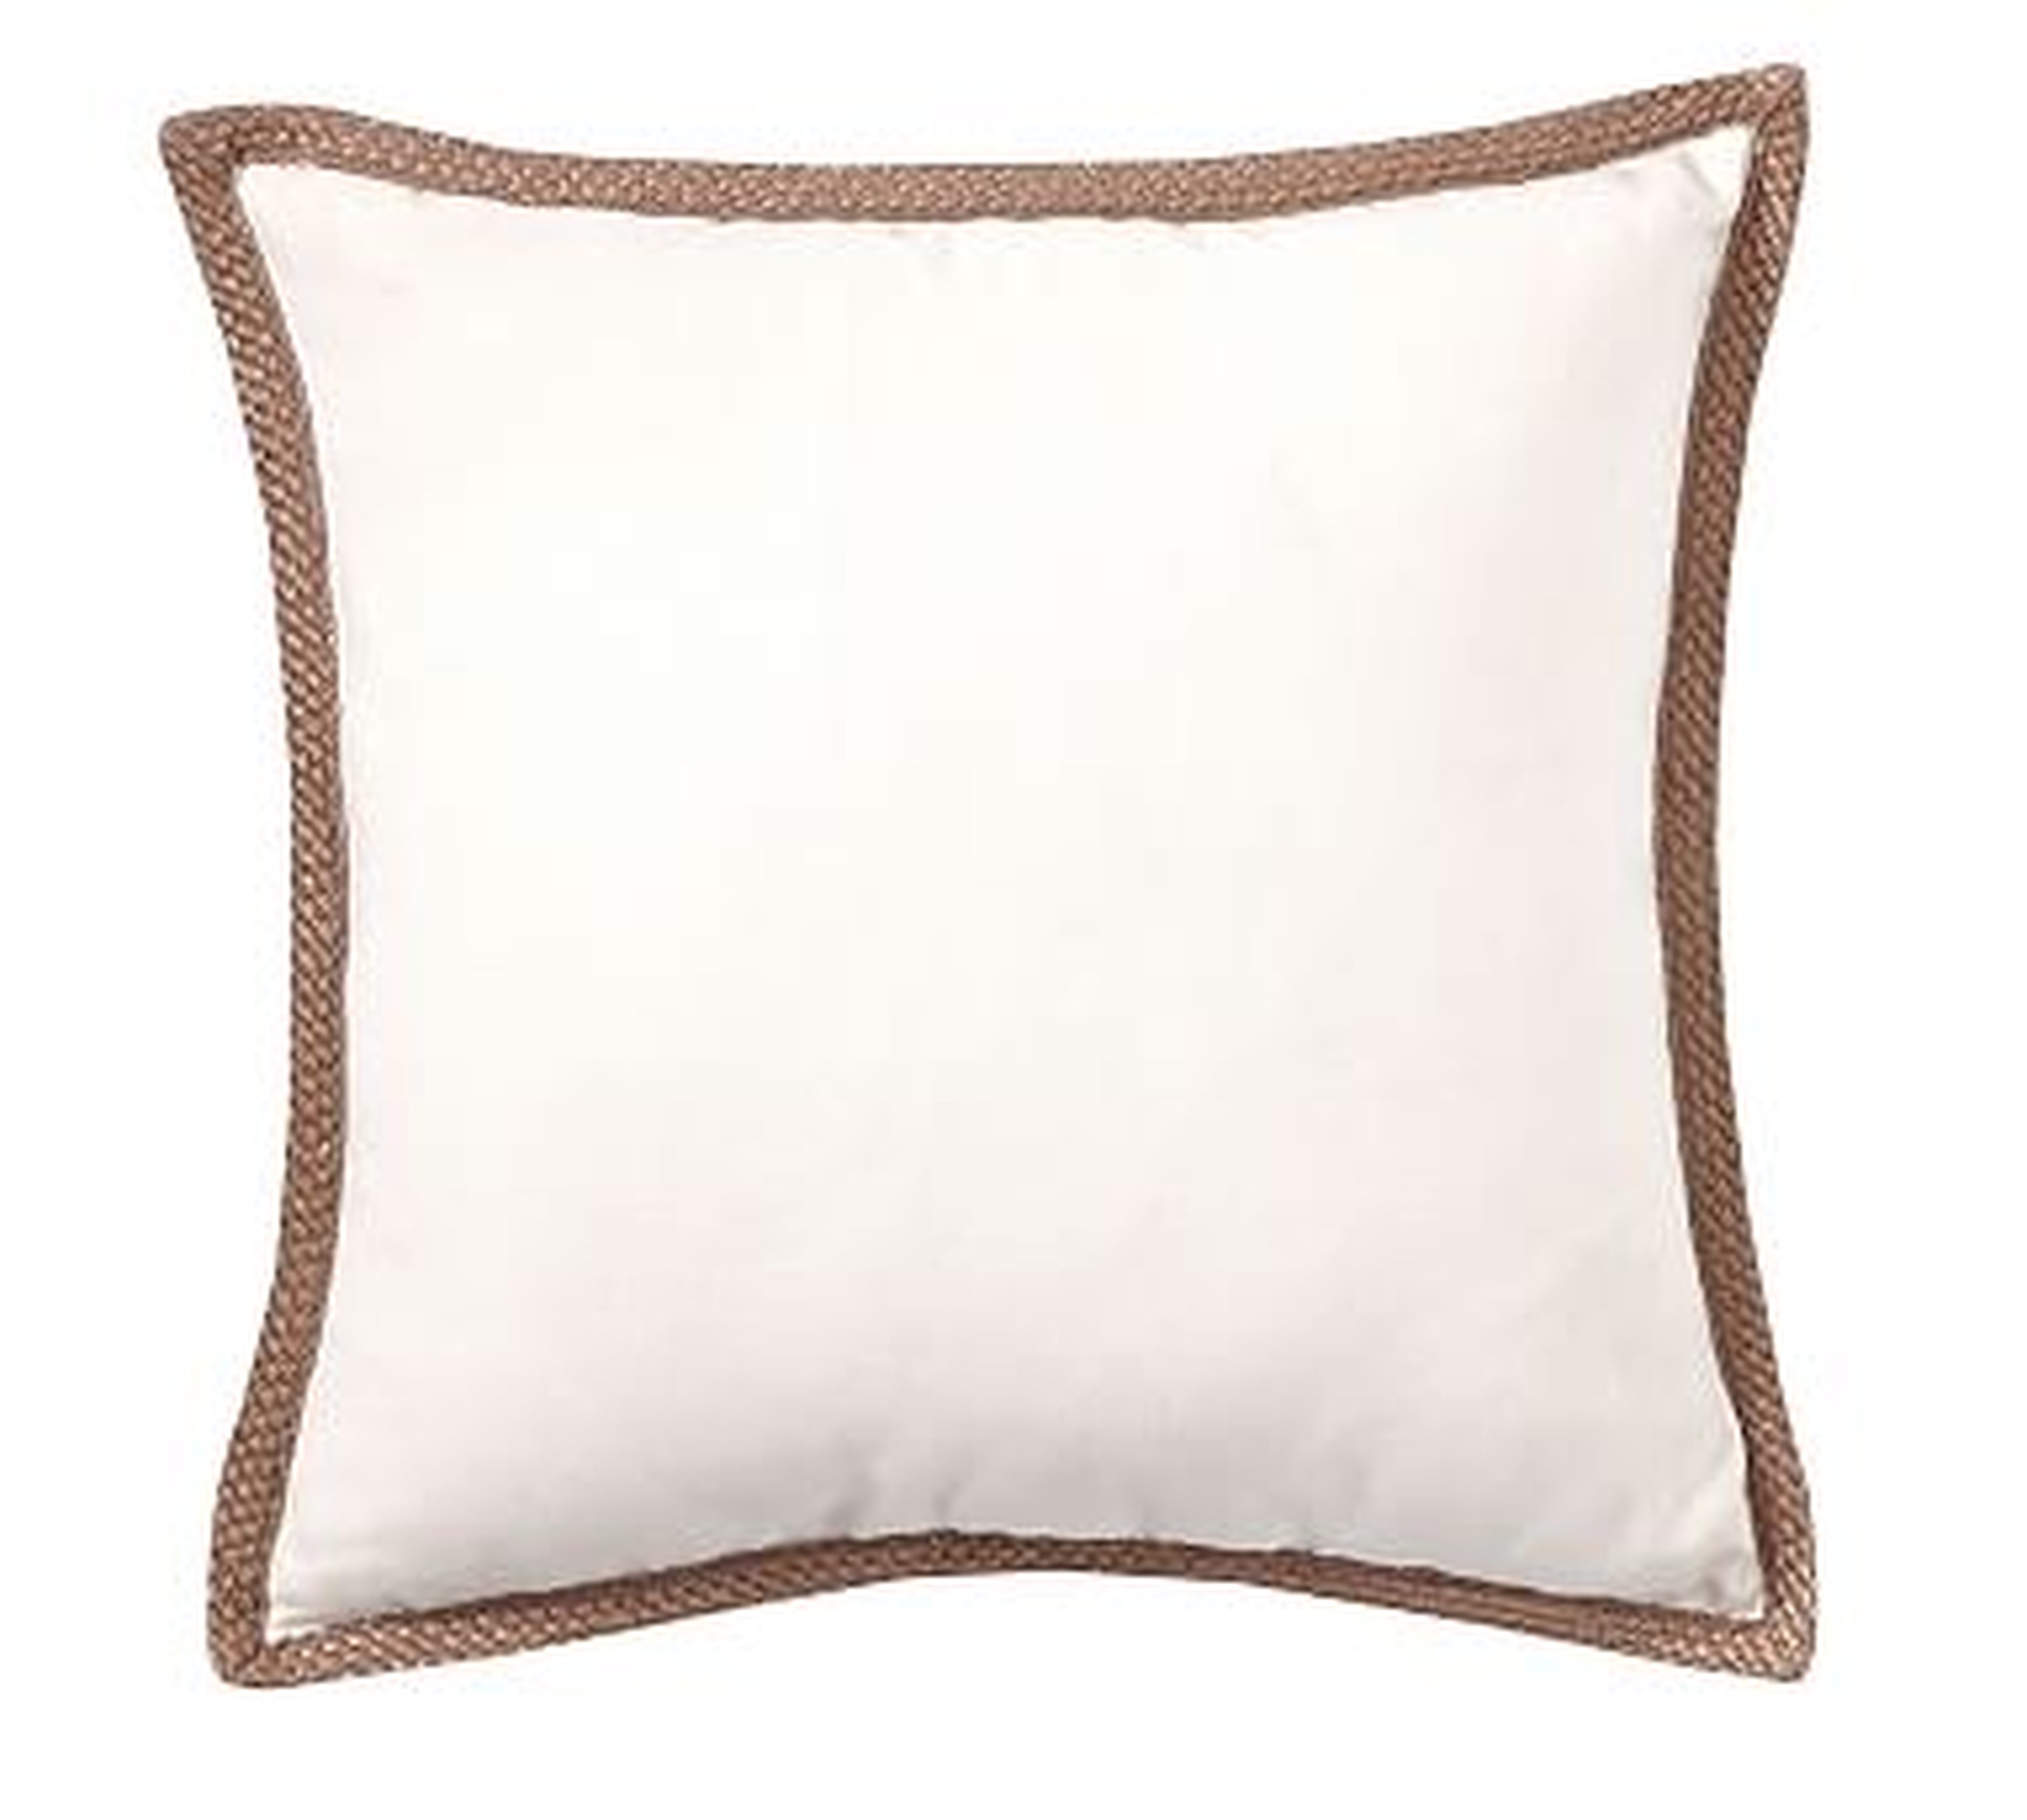 Synthetic Trim Indoor/Outdoor Pillow, 20", Natural - Pottery Barn